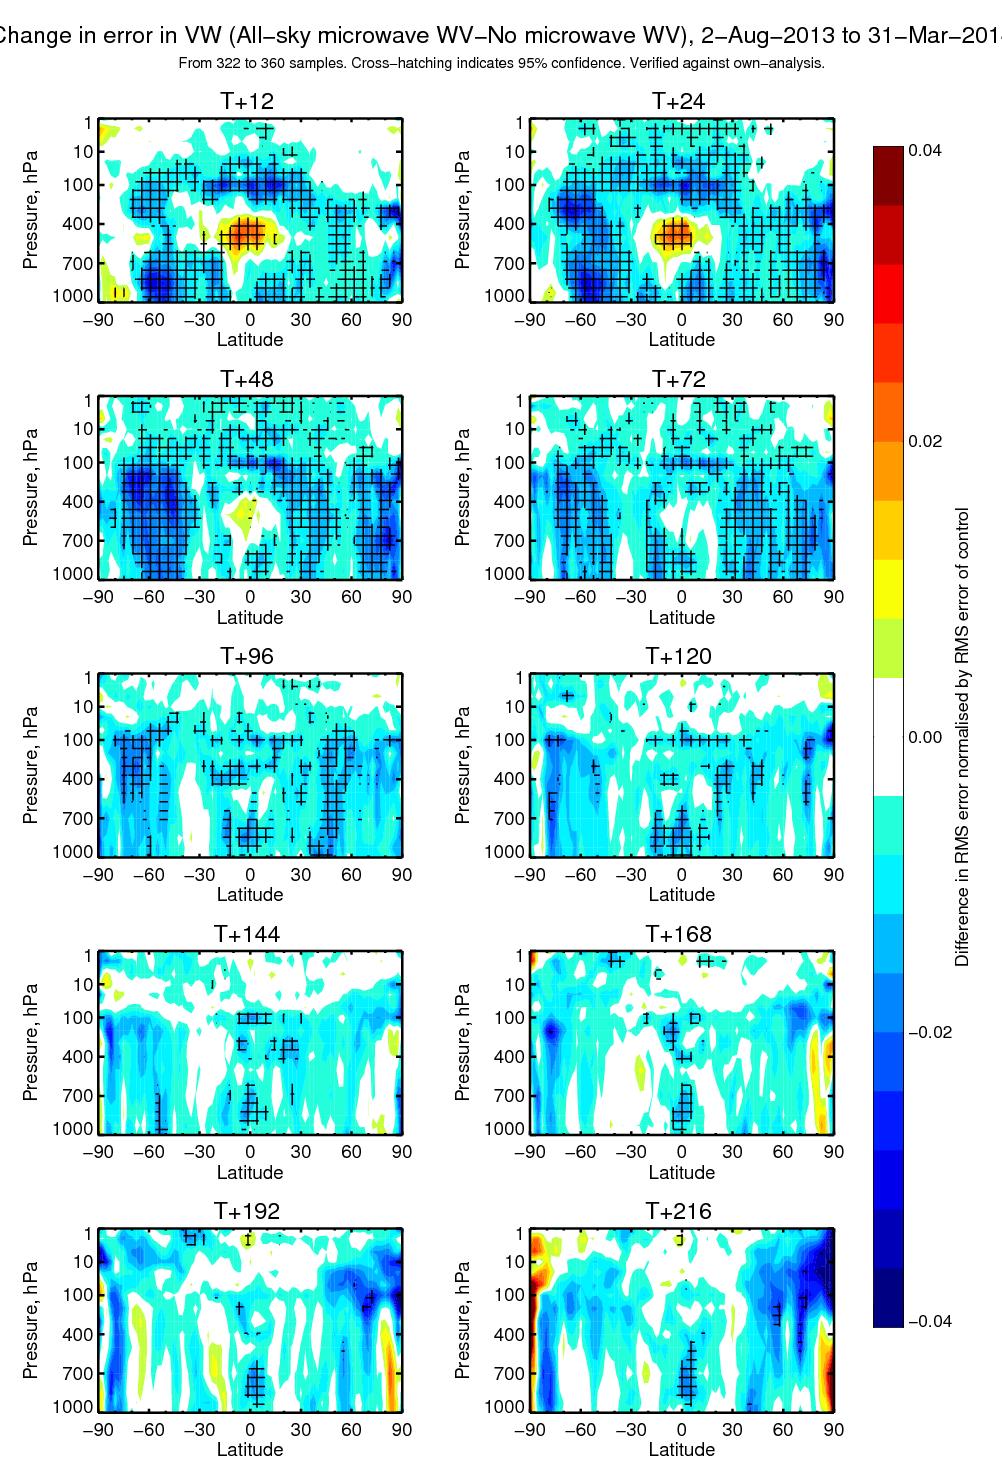 Impact of all-sky microwave humidity sounders on top of the otherwise full observing system Around 1% impact on day 4 and 5 dynamical forecasts Change in RMS error of vector